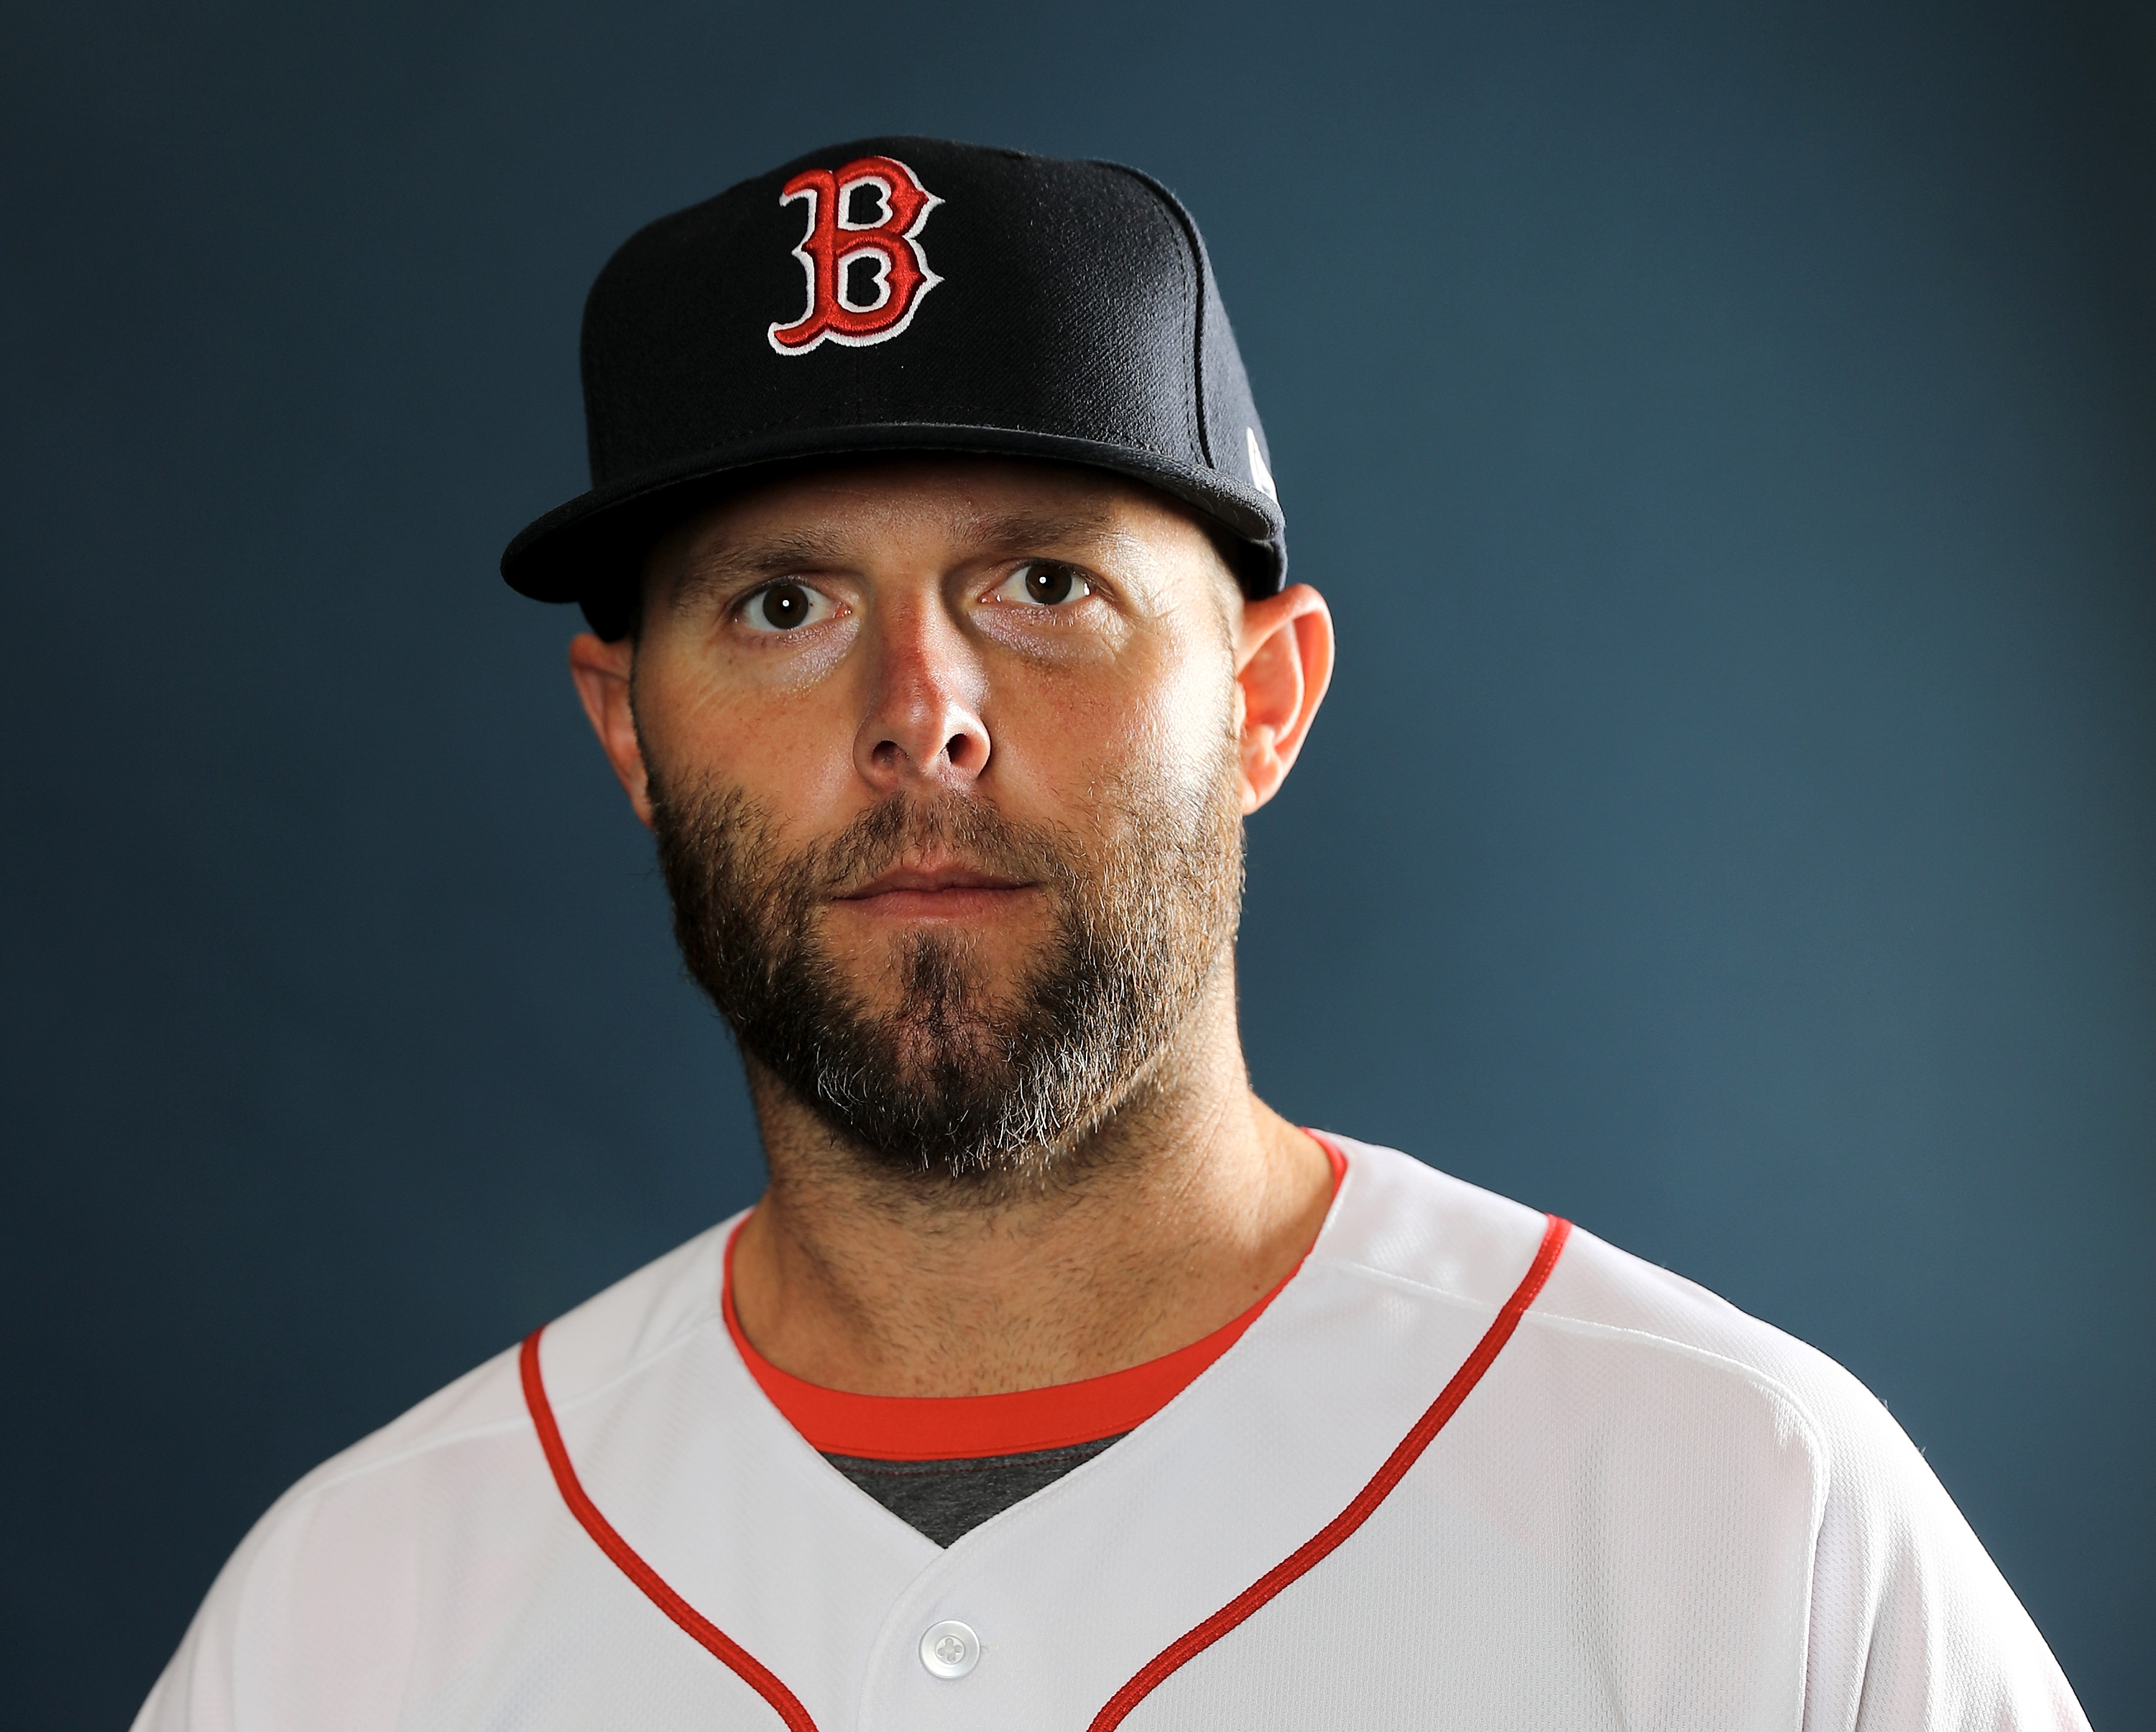 Boston Red Sox 2B Dustin Pedroia is about to have a career year